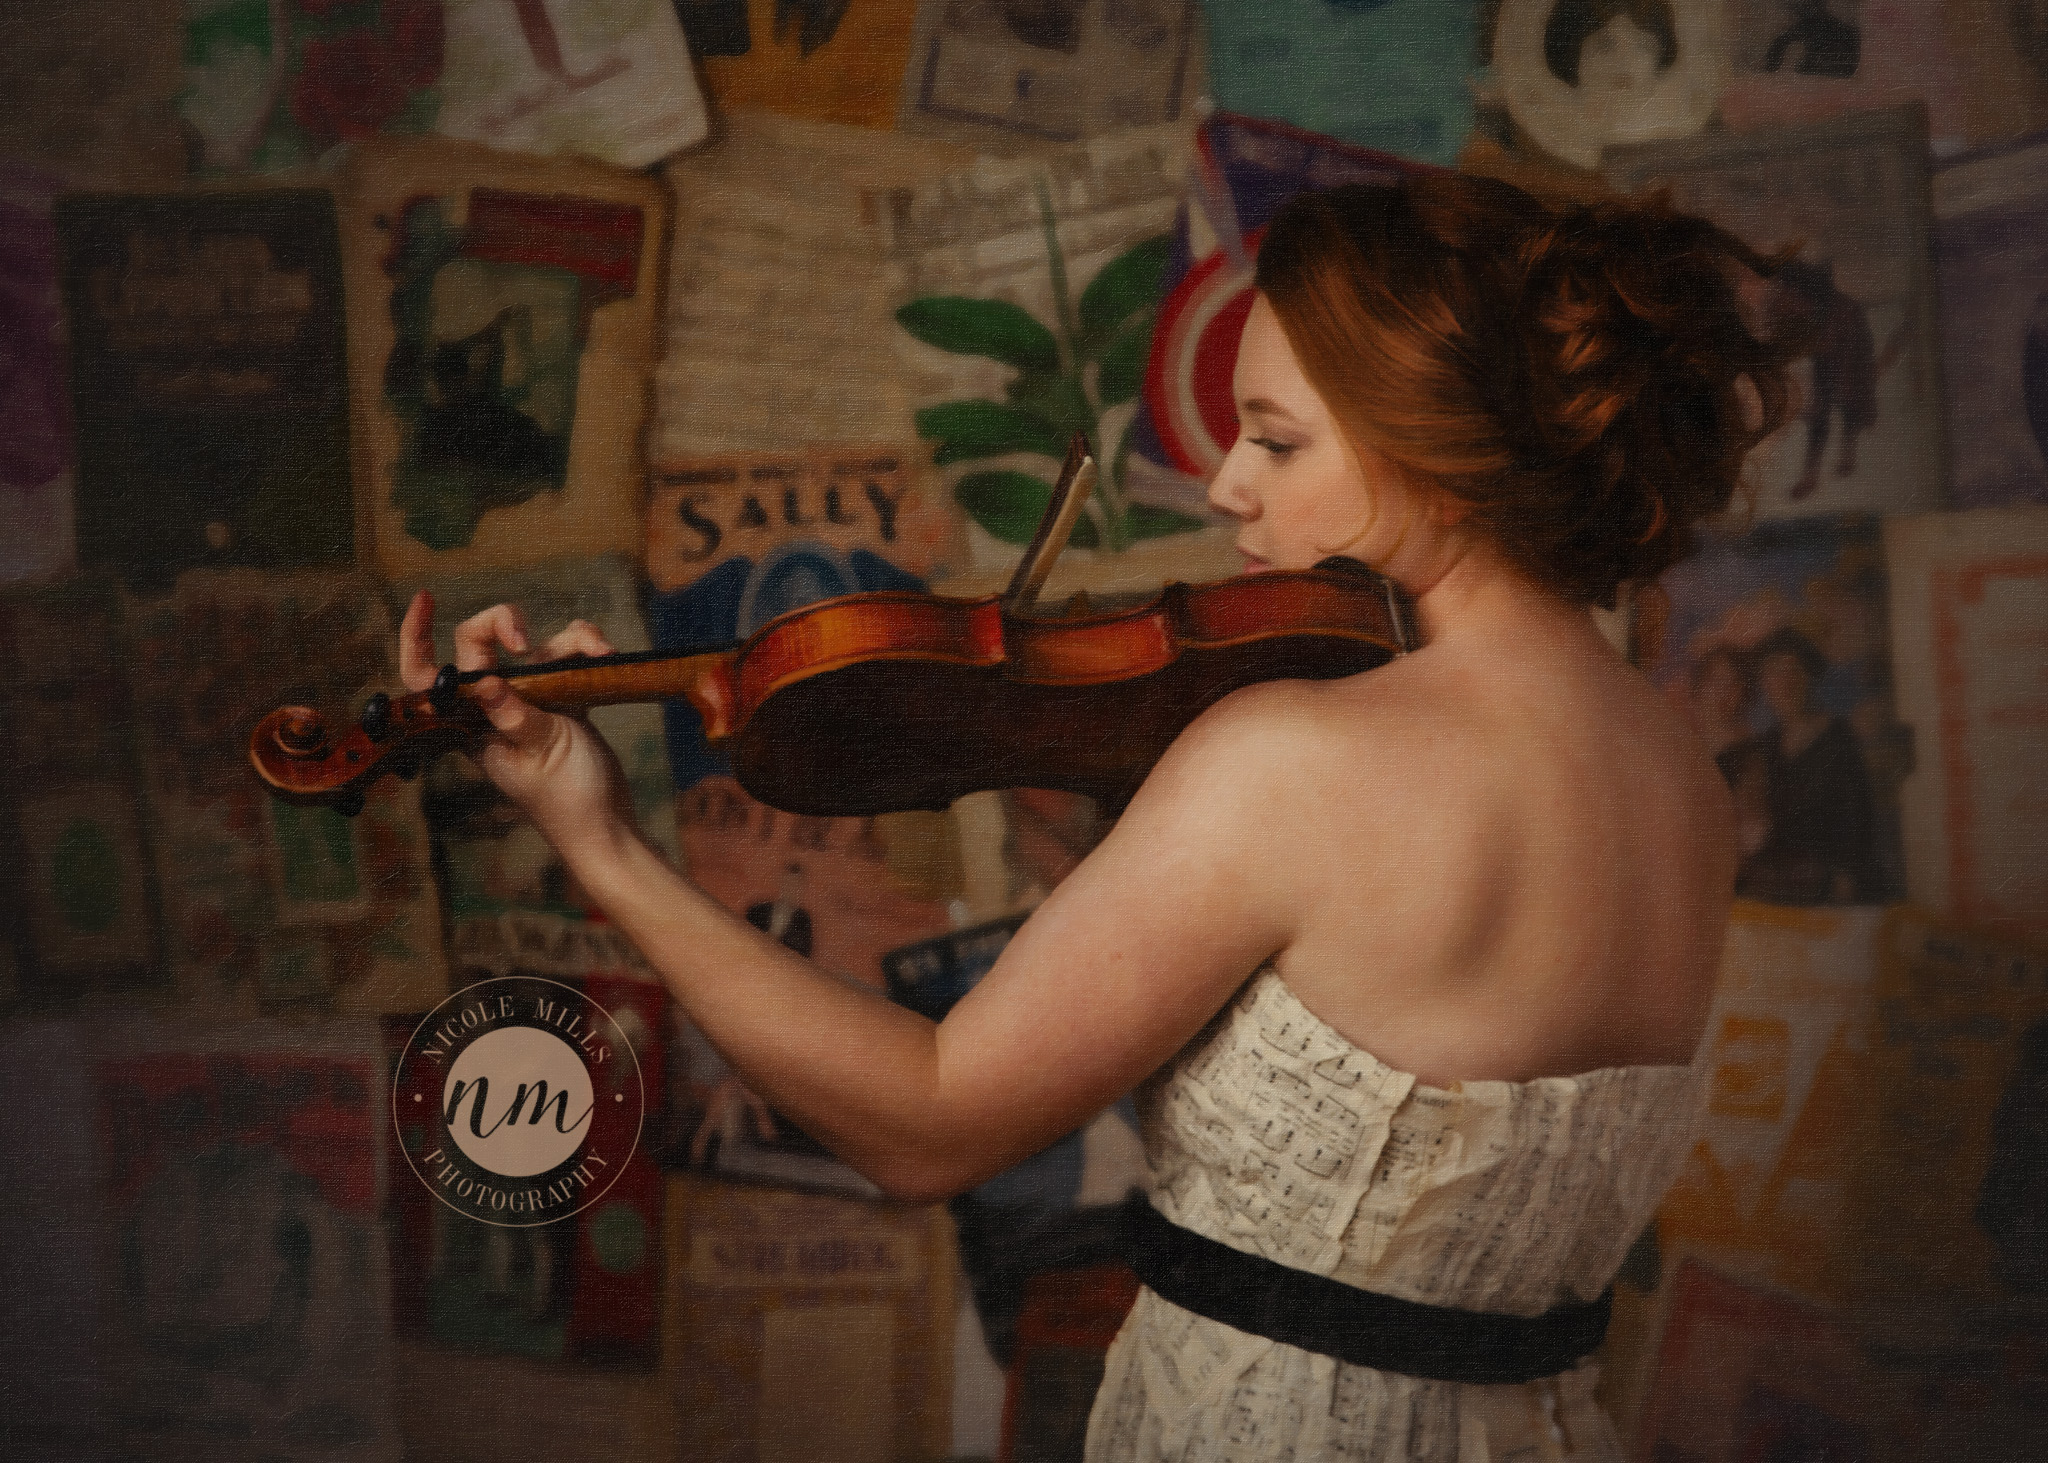 Nicole Mills Photography Rochester MN Music Portrait Gown